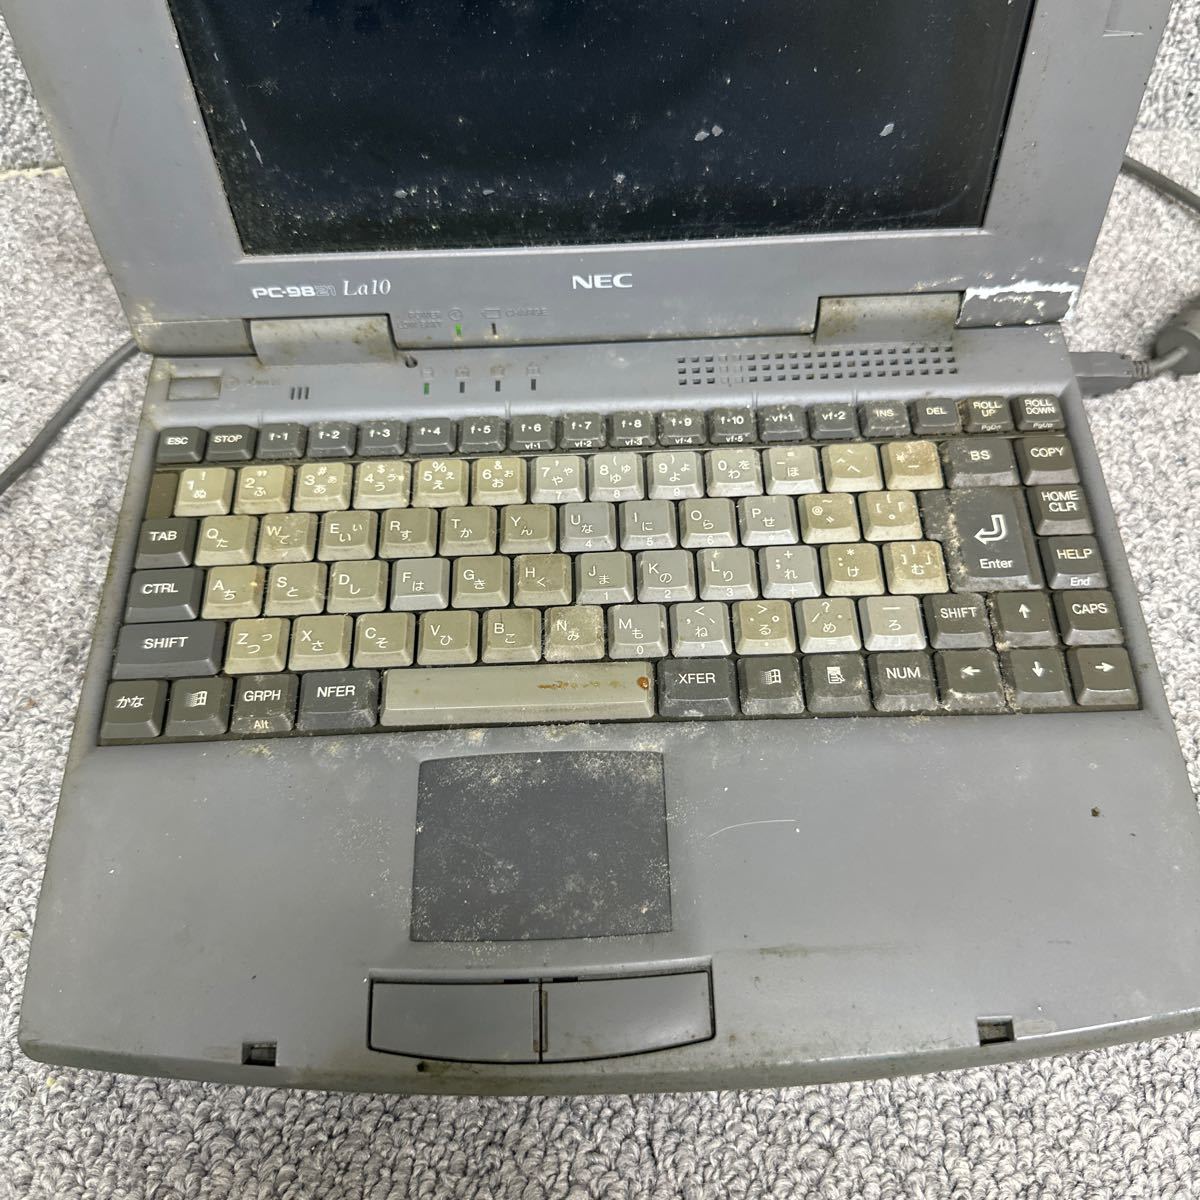 PCN98-1413 super-discount PC98 notebook NEC PC-9821La10/8 start-up has confirmed Junk including in a package possibility 